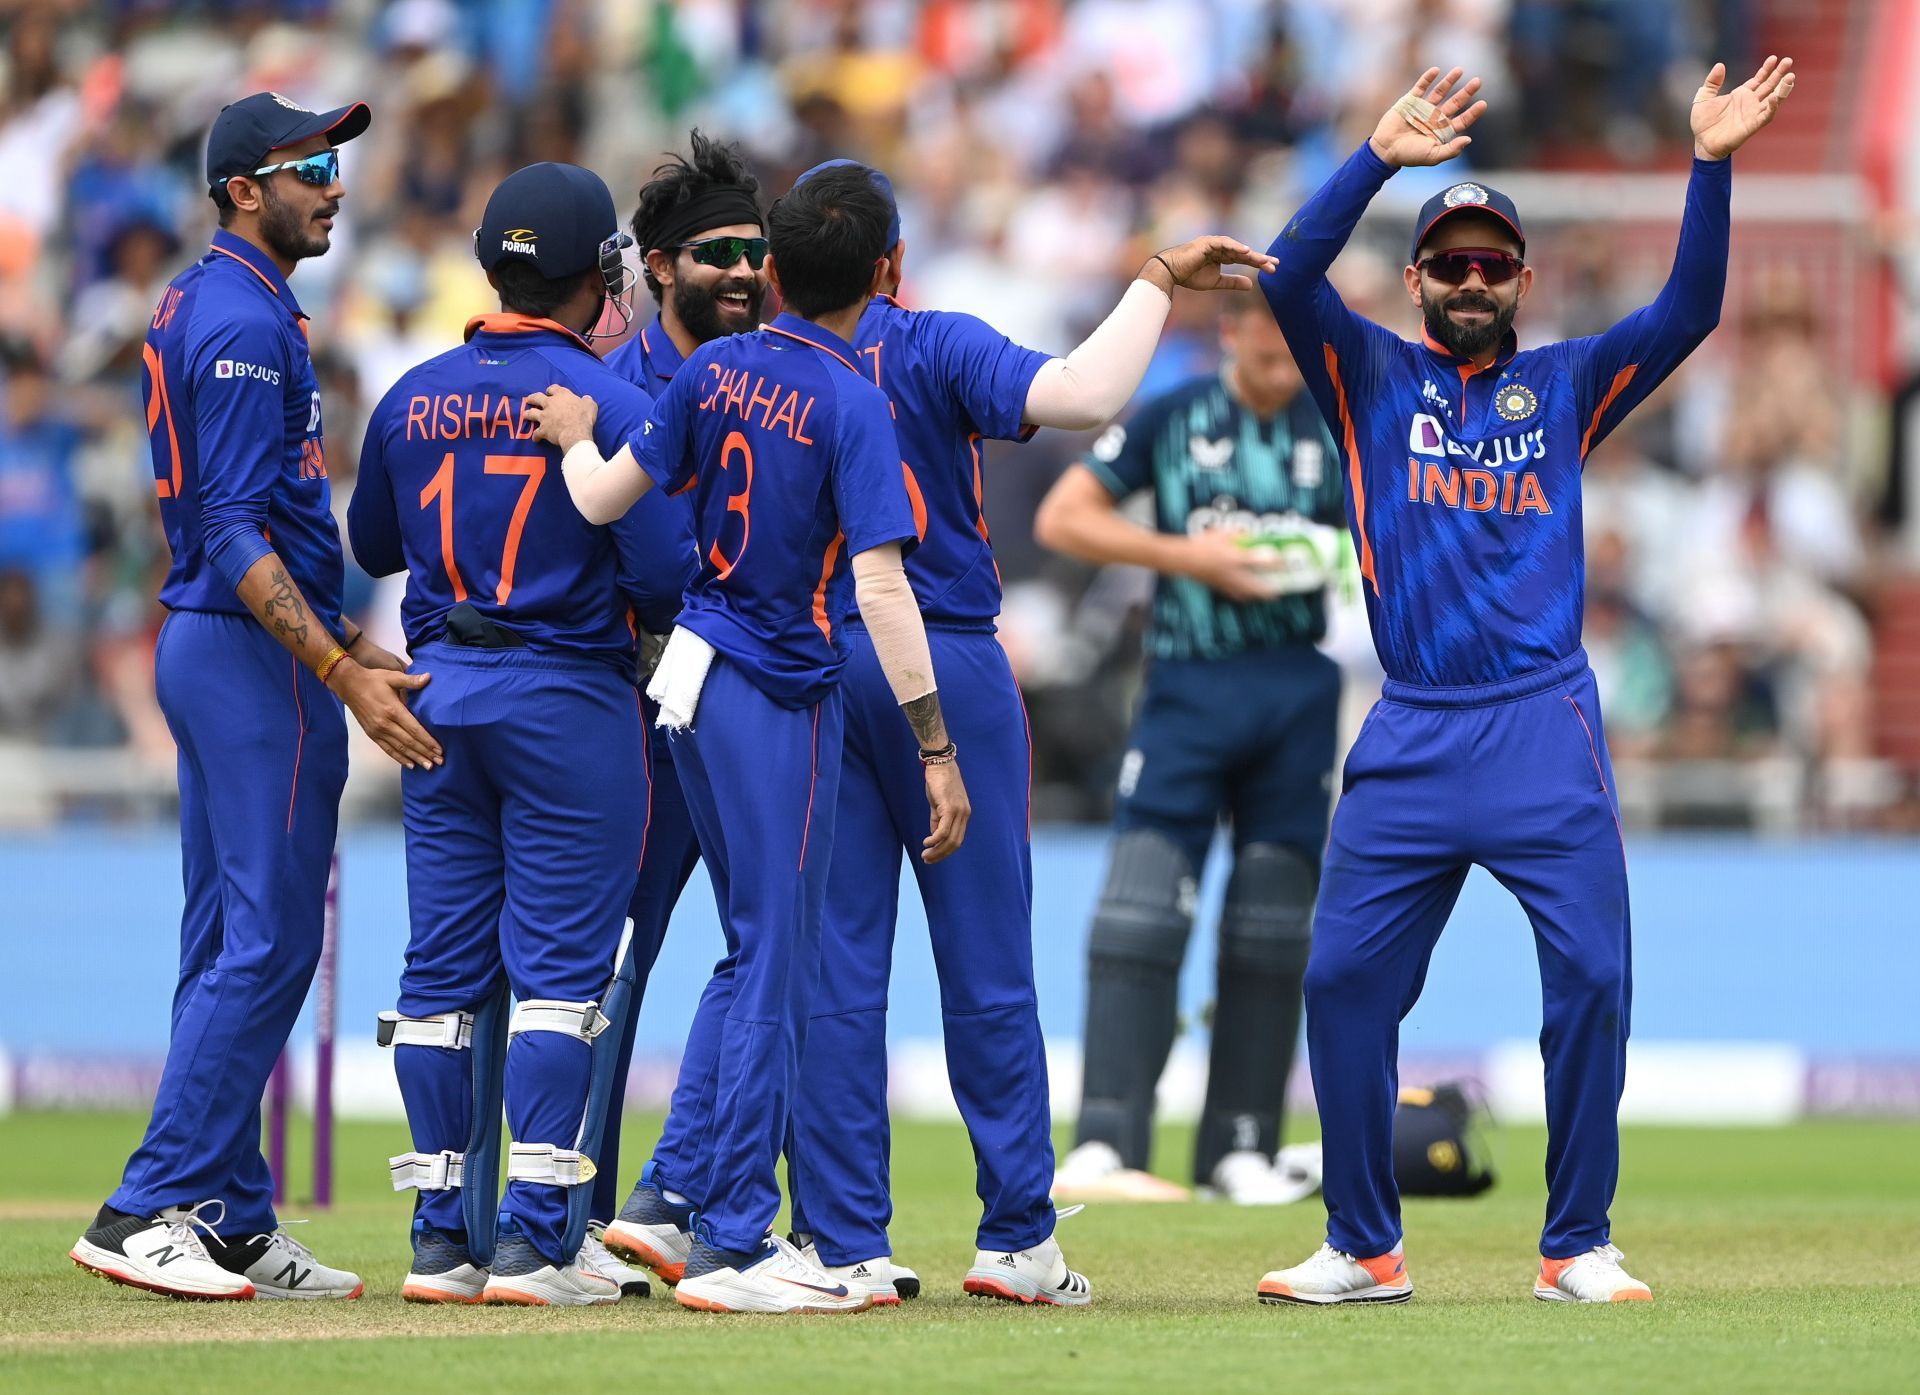 More cause for celebration: India are at a distinct advantage playing in the UAE